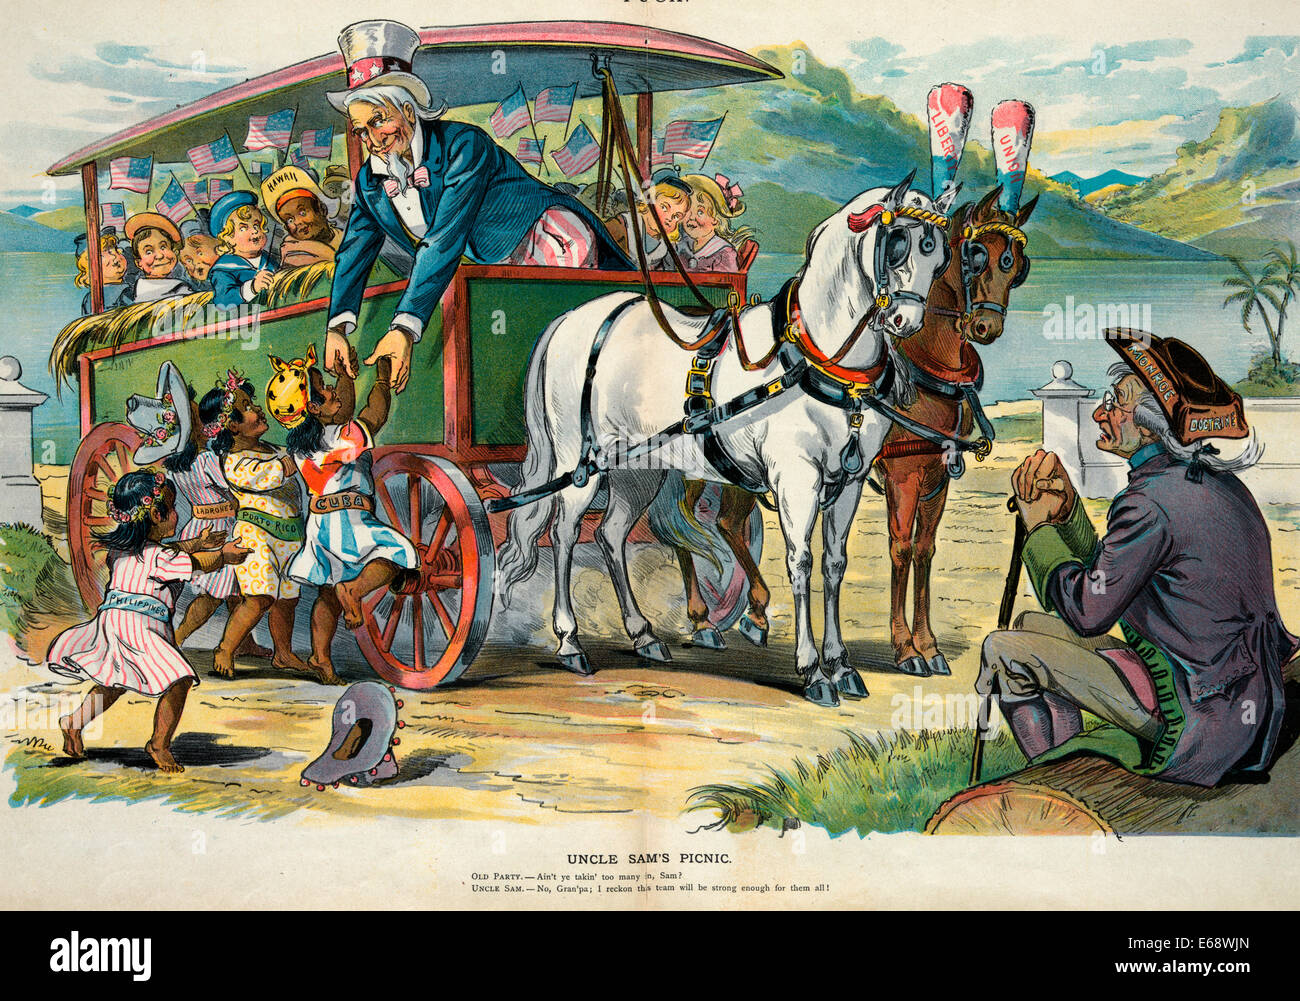 Uncle Sam's picnic - Uncle Sam helping four little girls labeled 'Philippines, Ladrones, Porto Rico, andCuba' onto a wagon filled with many other young children, including 'Hawaii'; two horses harnessed to the wagon are labeled 'Liberty' and 'Union'. An old man, wearing a hat labeled 'Monroe Doctrine', is sitting on a log nearby and asks Sam if the wagon isn't getting too full. Political Cartoon, 1898 Stock Photo